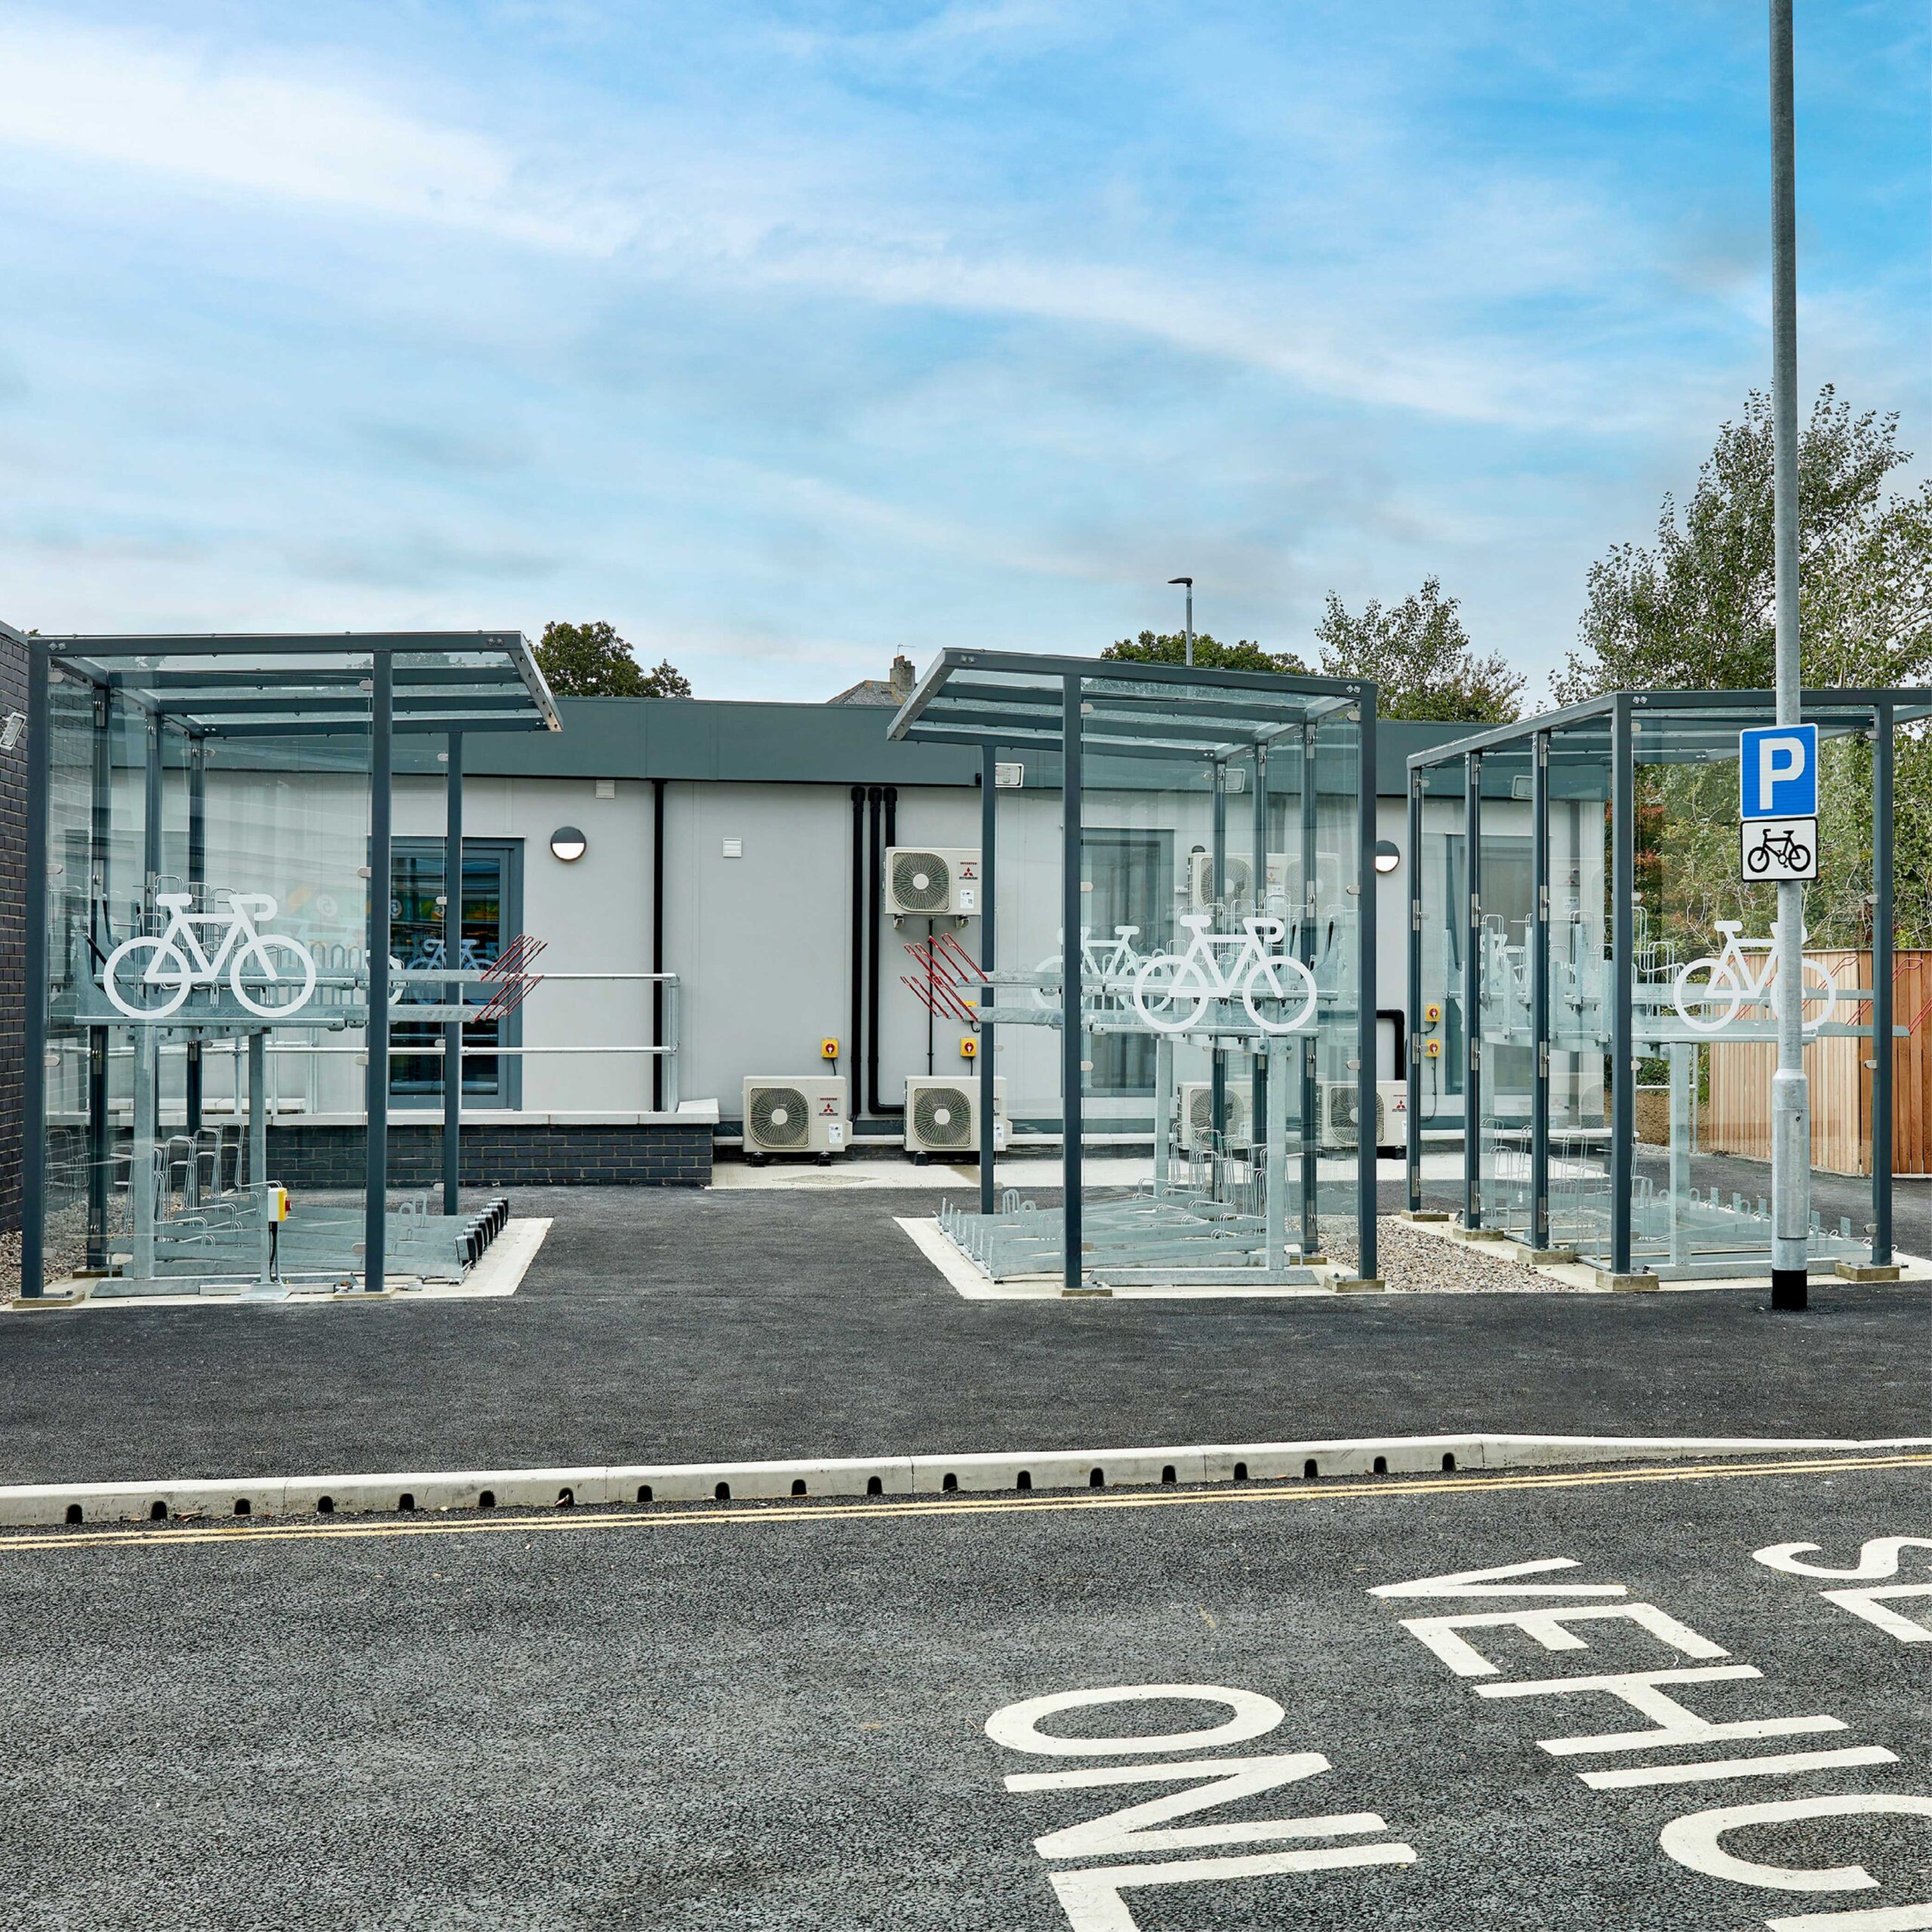 Modern bicycle parking facility with glass enclosures and clear bicycle icons on the entrances, located next to a parking area with white pavement markings indicating "shelter.